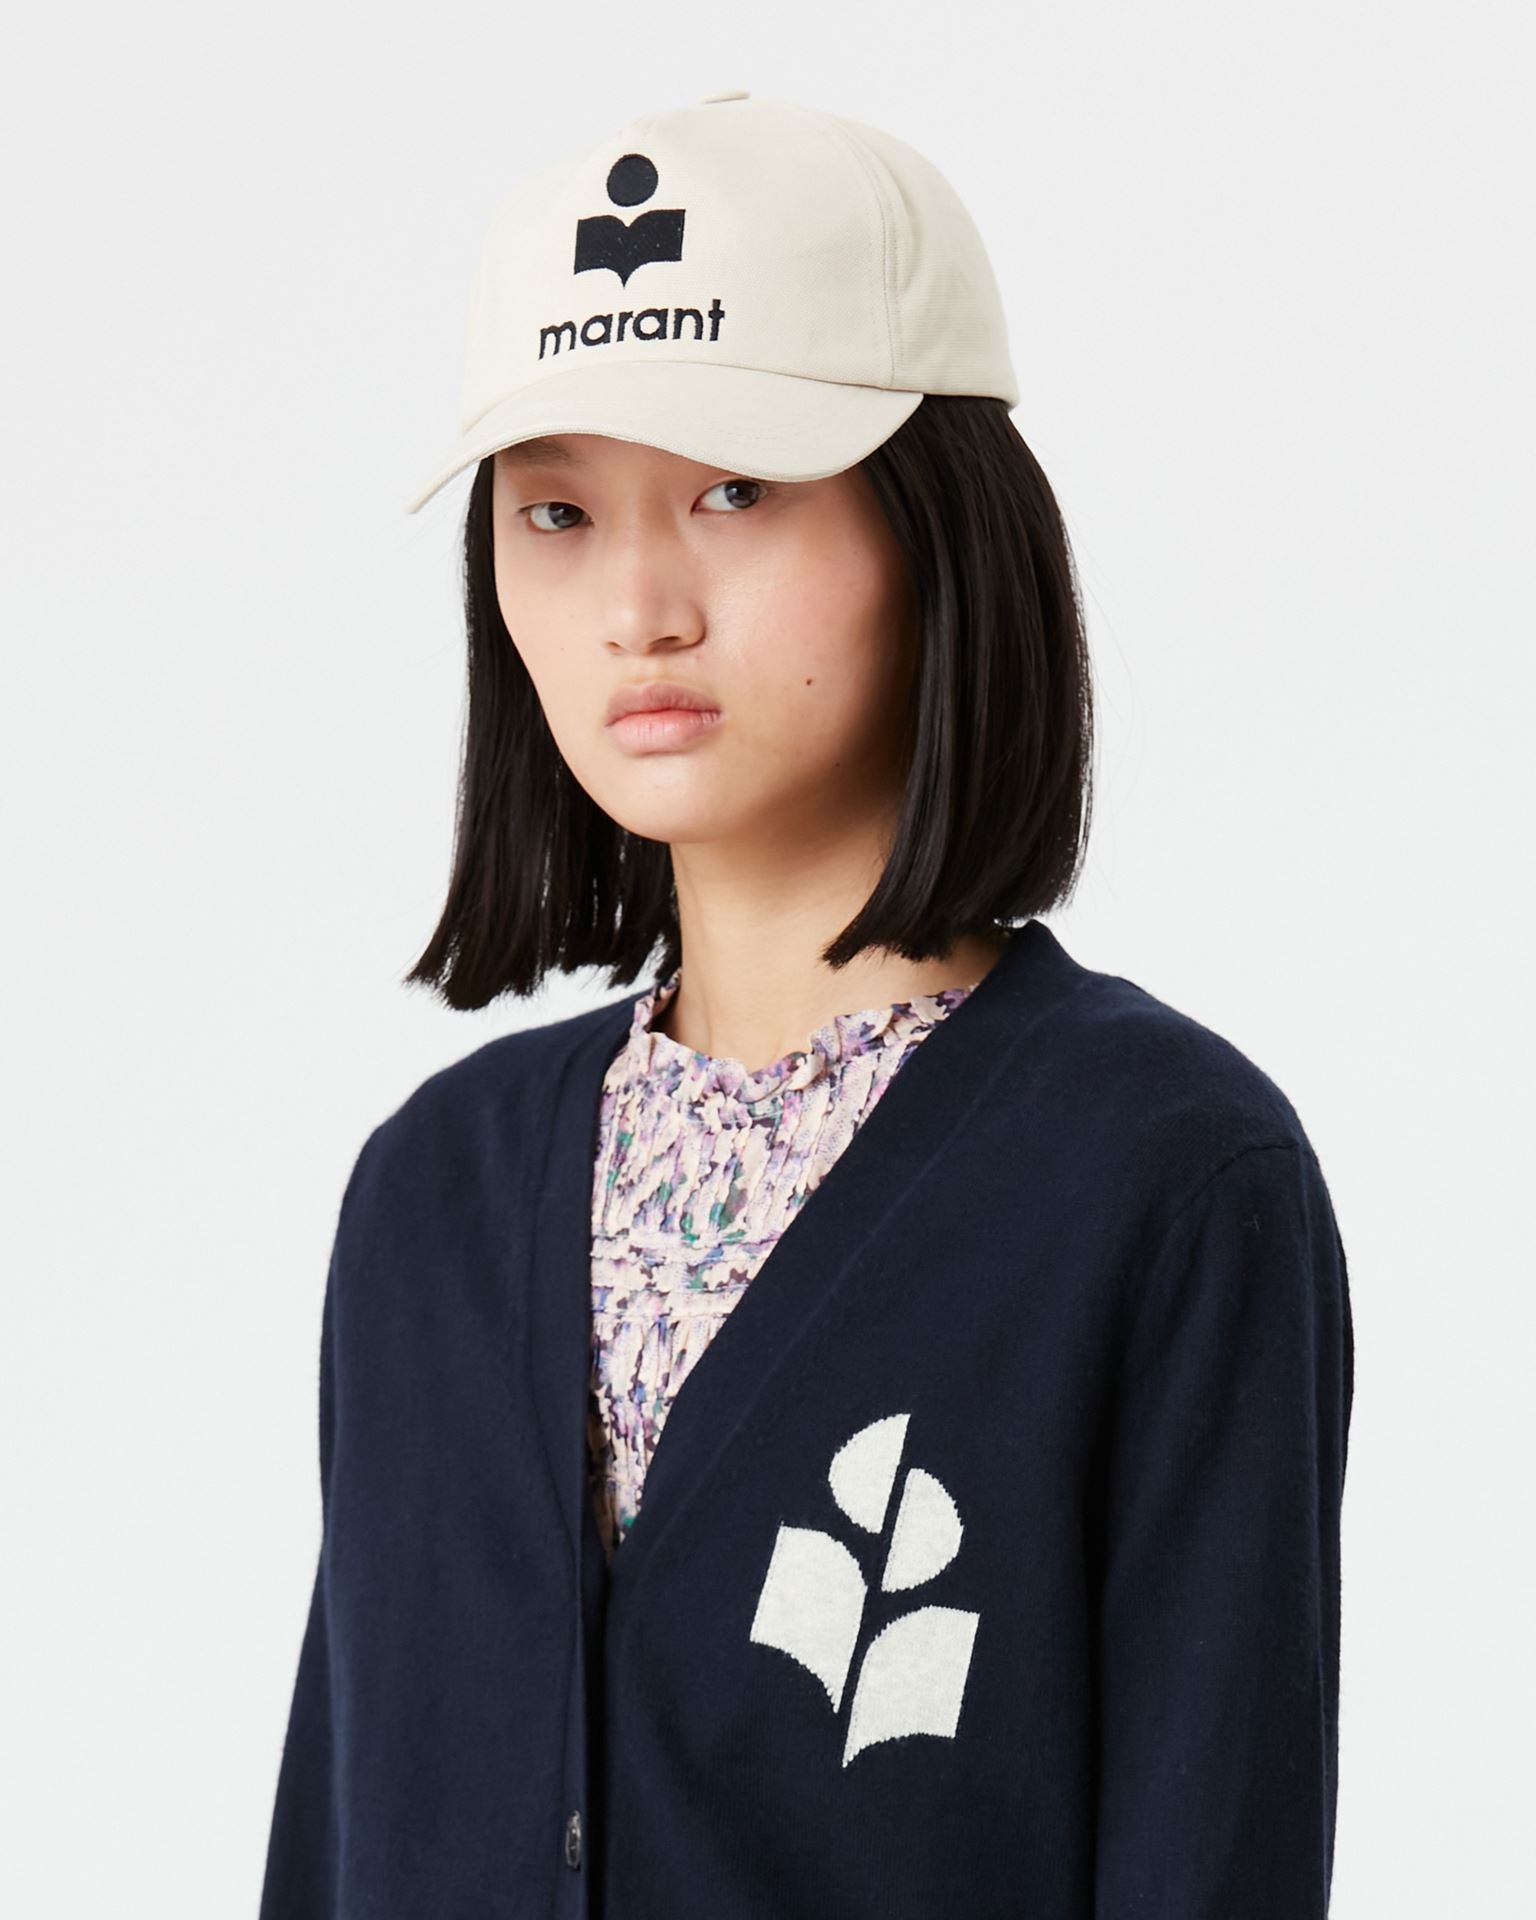 Isabel Marant Tyron Cap in Ecru/Black available at TNT The New Trend Australia. Free shipping on orders over $300 AUD.